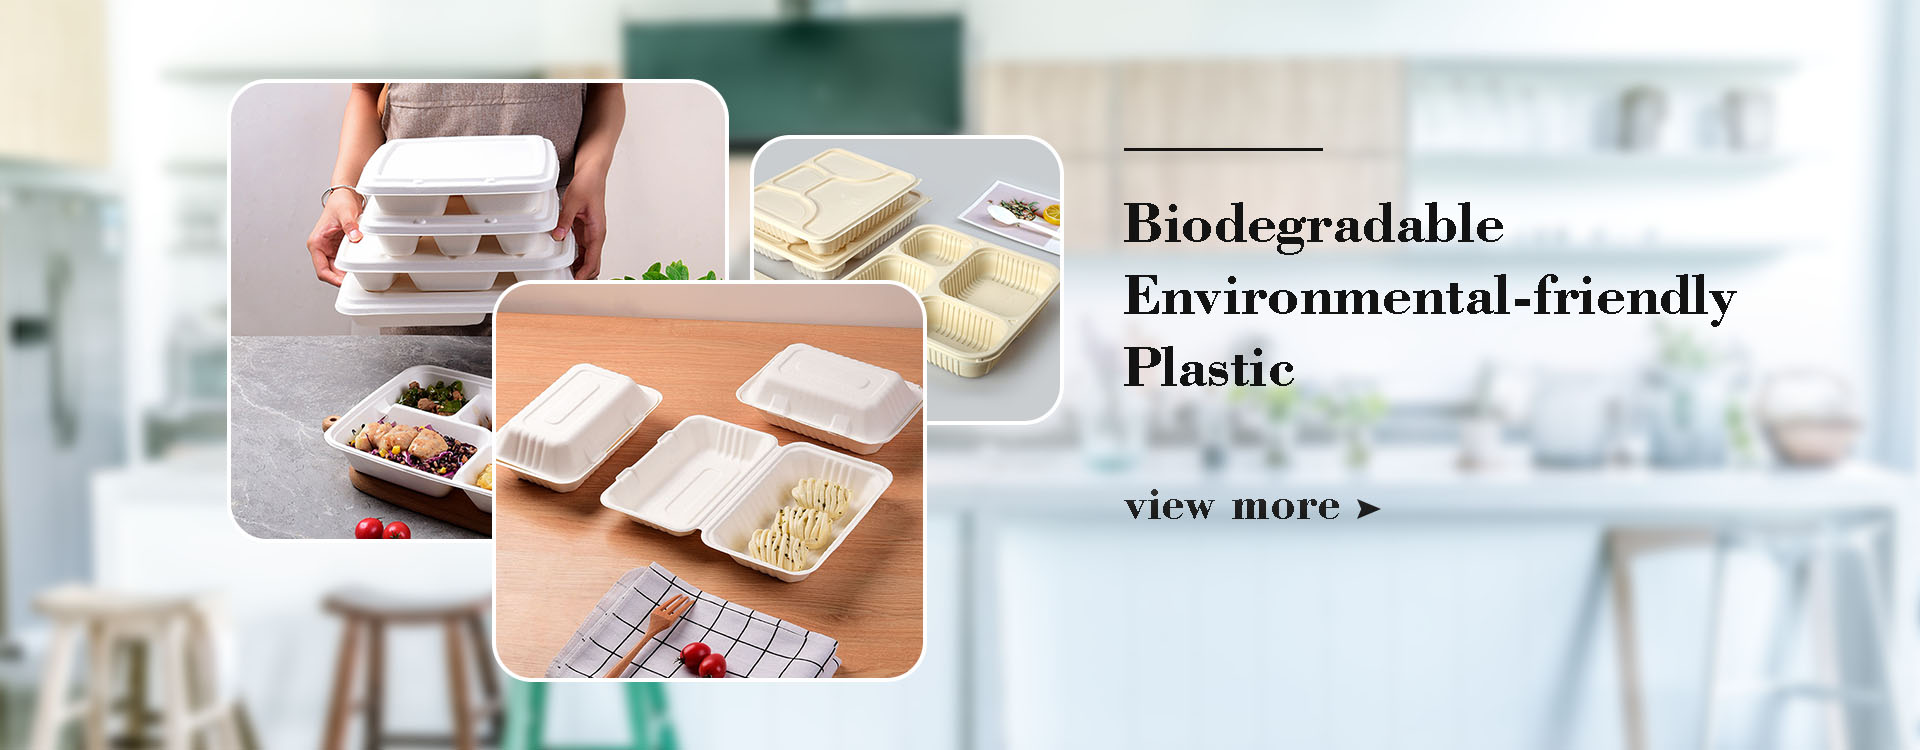 China Biodegradable Environmental-friendly Plastic Manufacturers